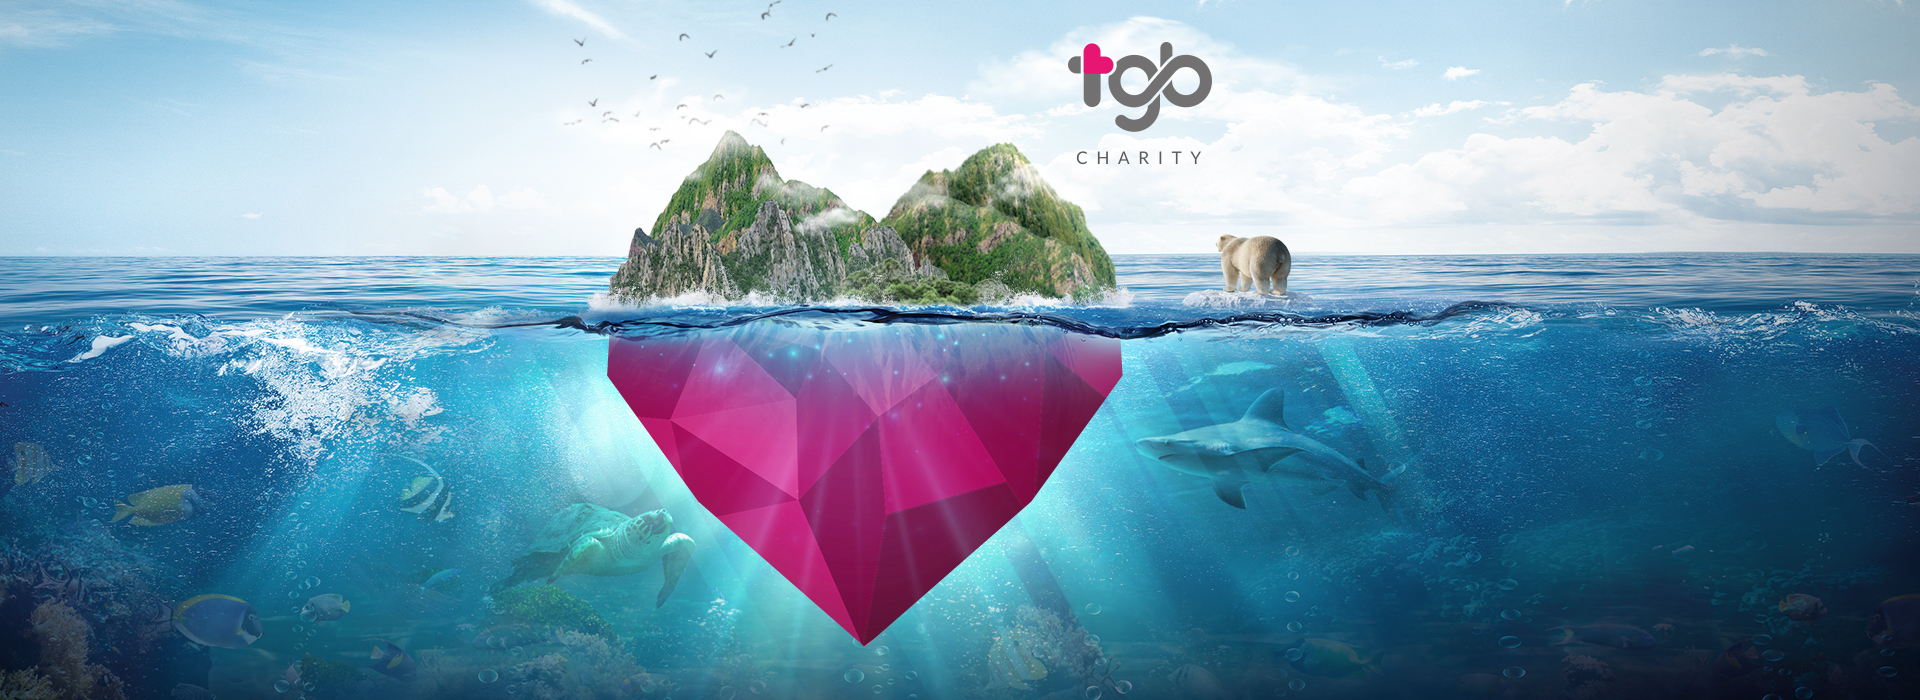 Protecting the variety of life on Earth - TGB Charity